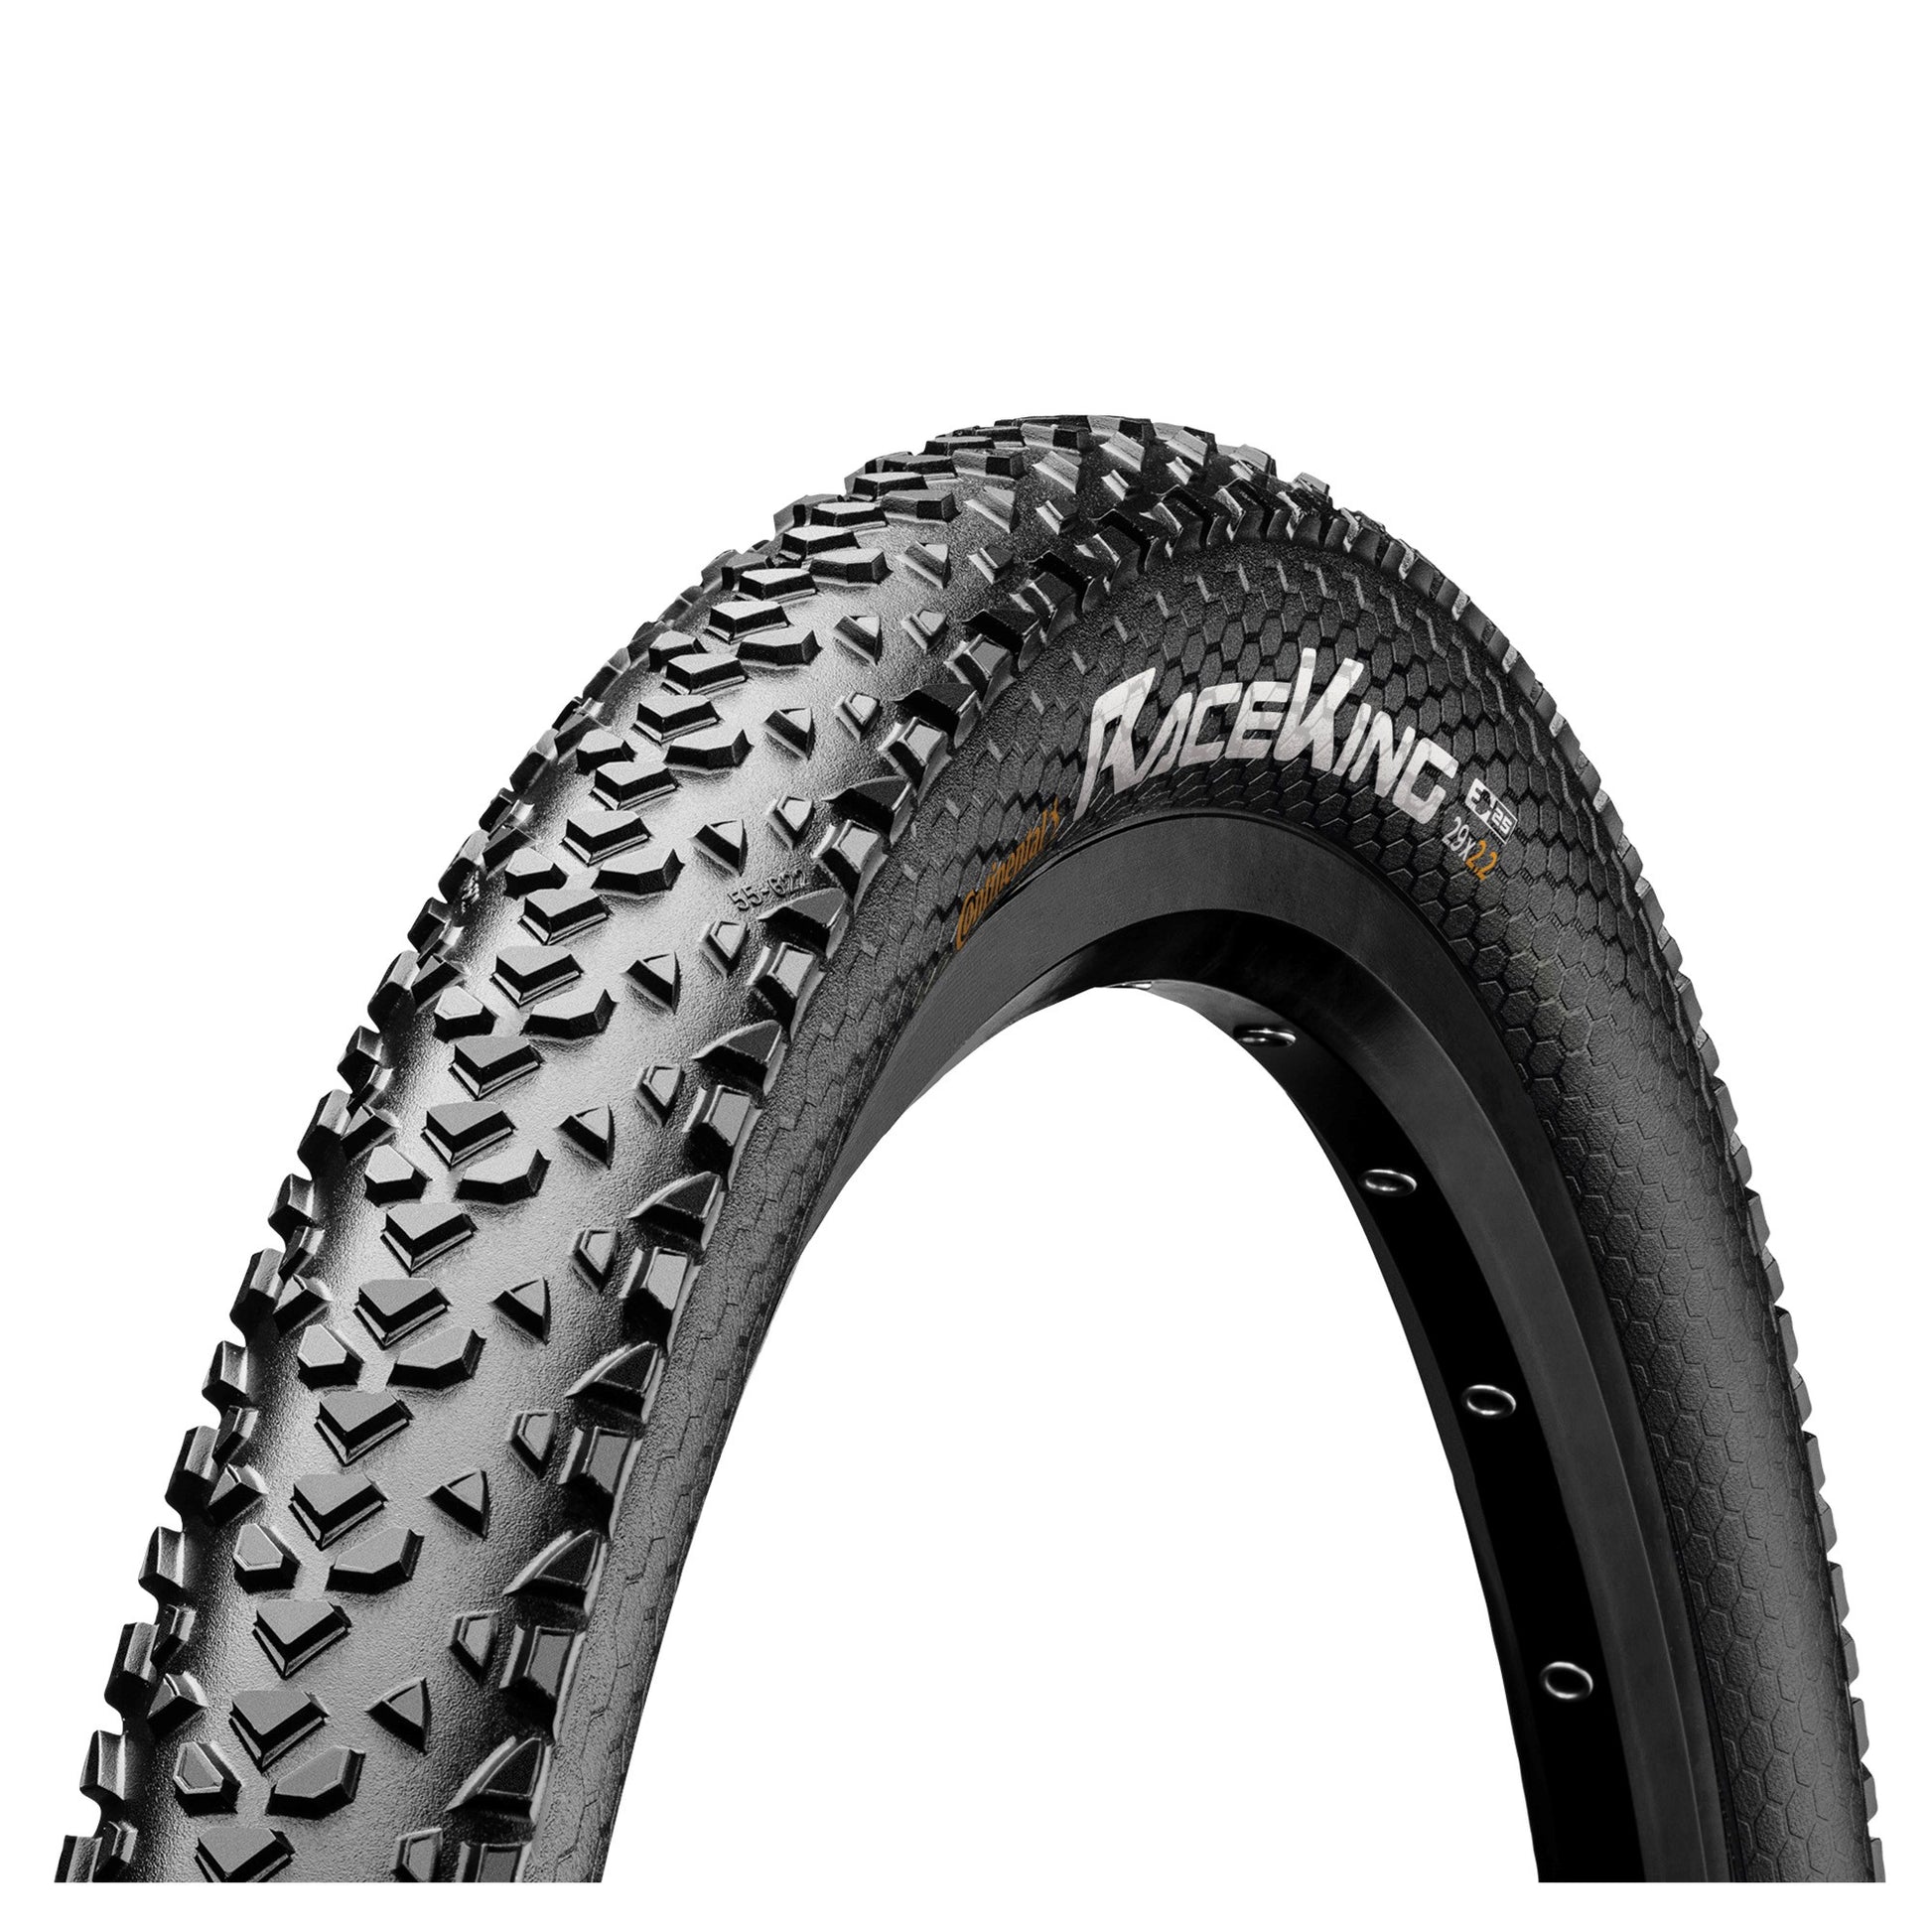 CONTINENTAL RACE KING 26" WIRED MTB TYRE